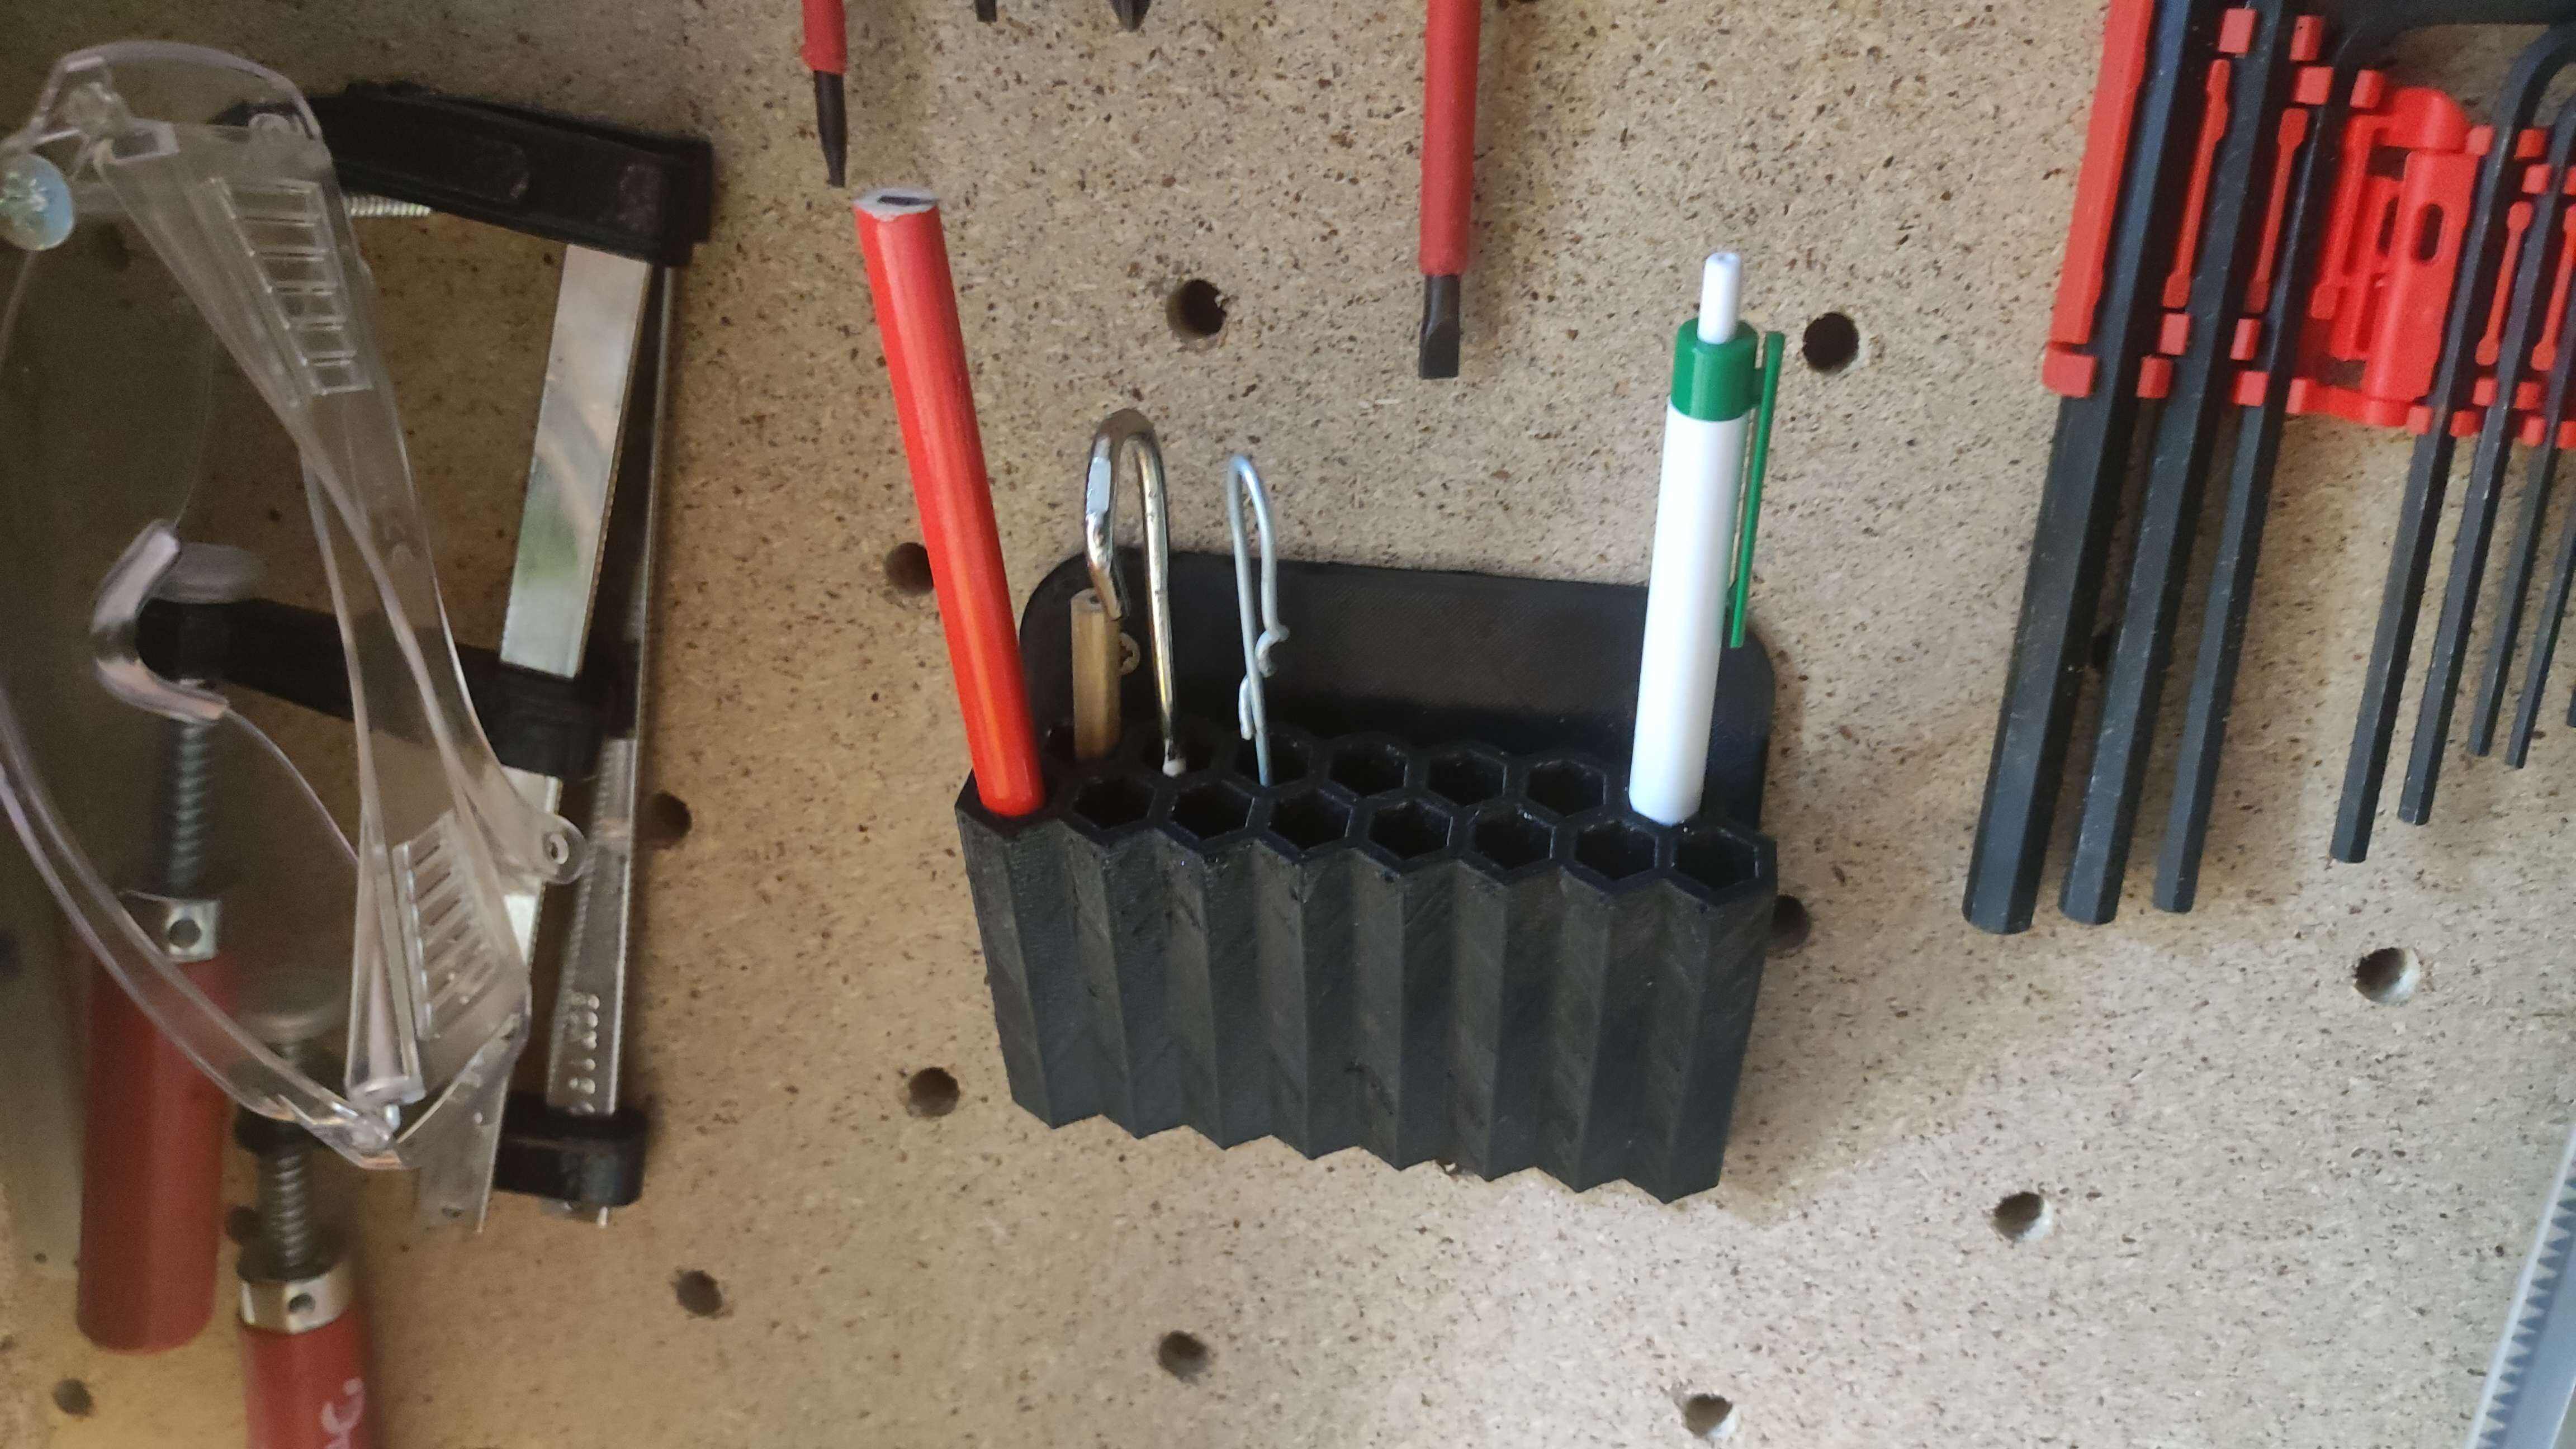 Wall-mounted pen holder